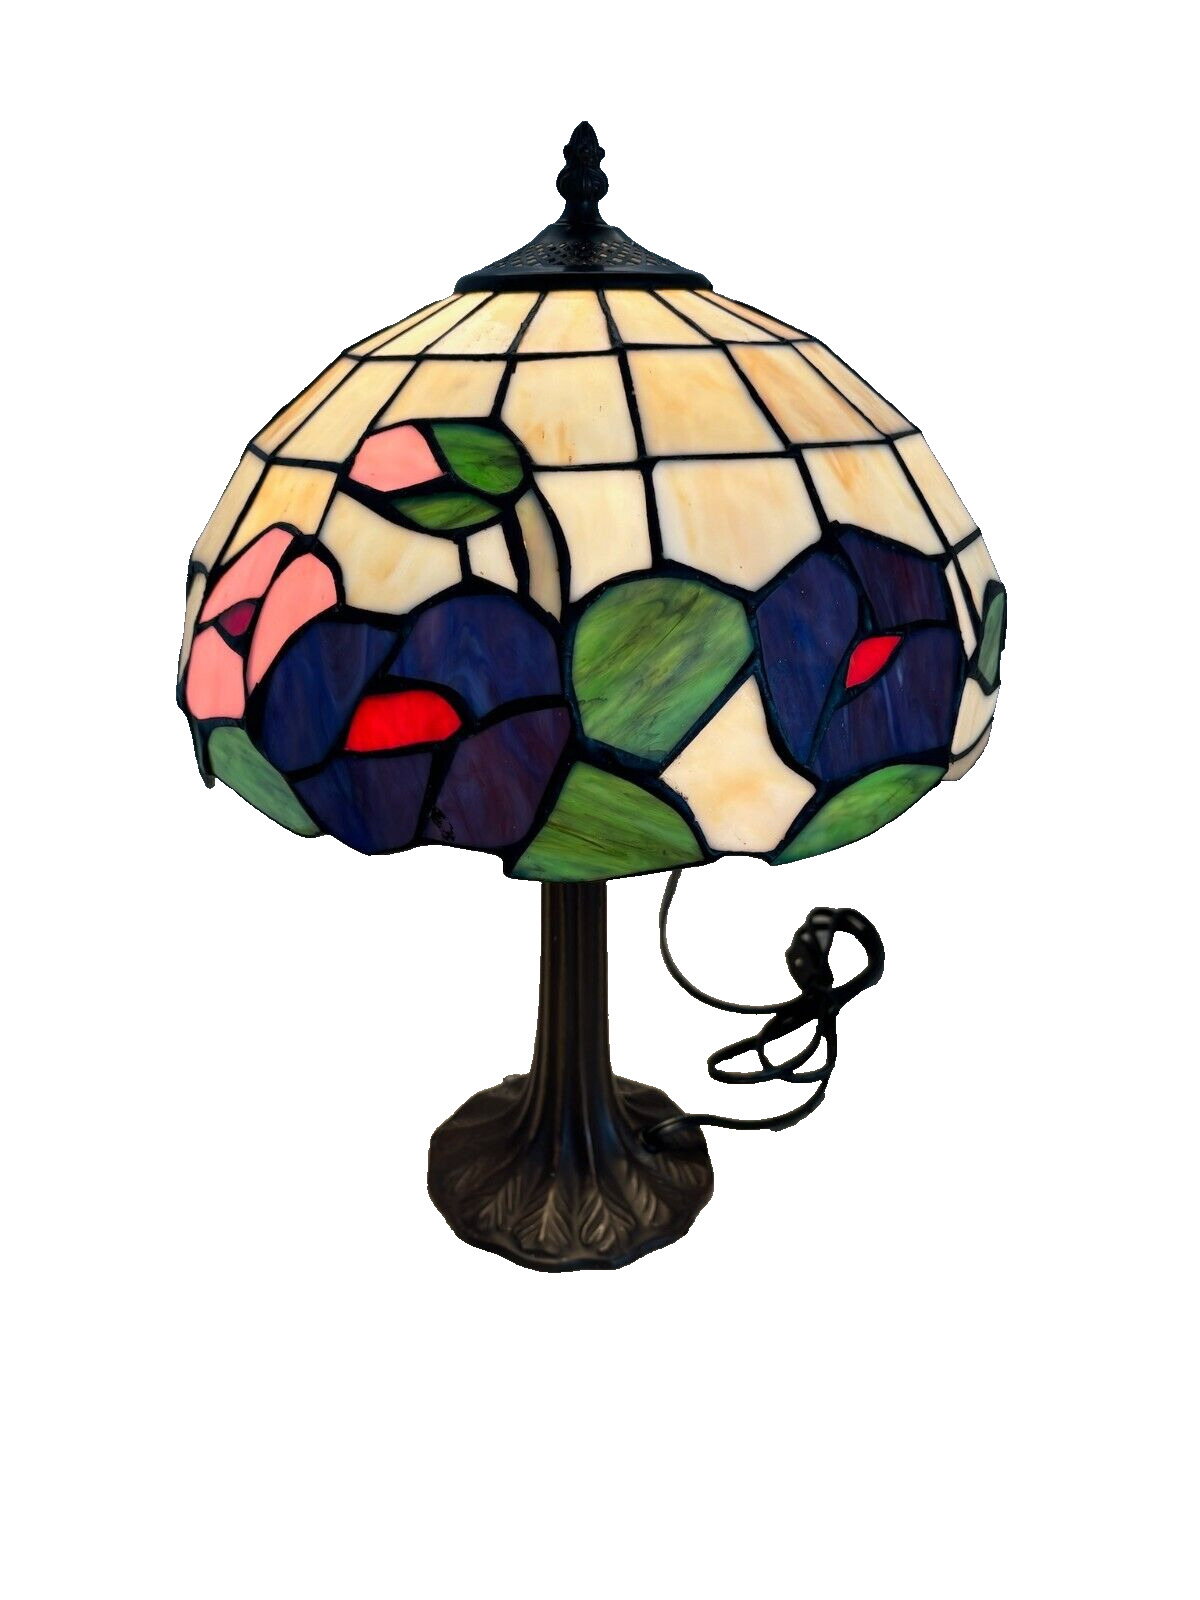 Vintage Tiffany Style Stained Glass Hummingbirds Floral Design Table Lamp 19